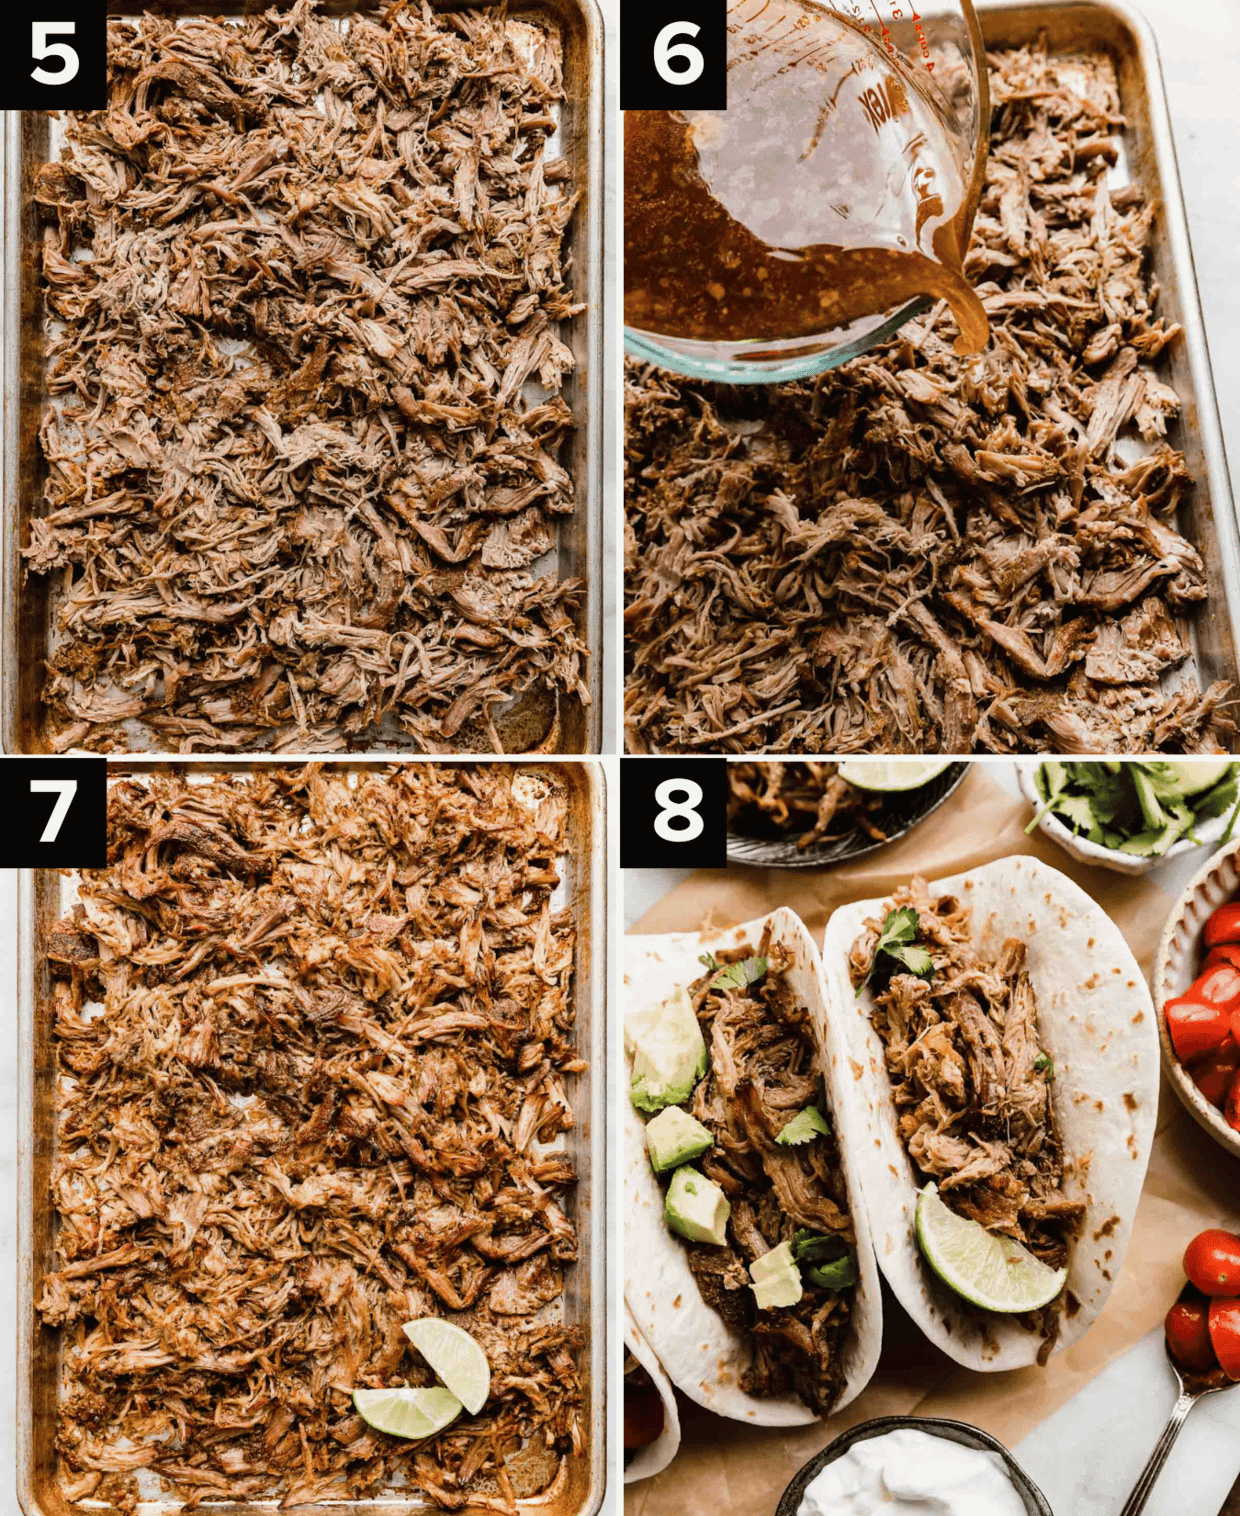 Four images showing Mexican pulled pork on a baking sheet, top right image has leftover pork juice being poured overtop, bottom left is crispy pulled pork on a baking sheet, bottom right is pork carnitas in flour tortillas.